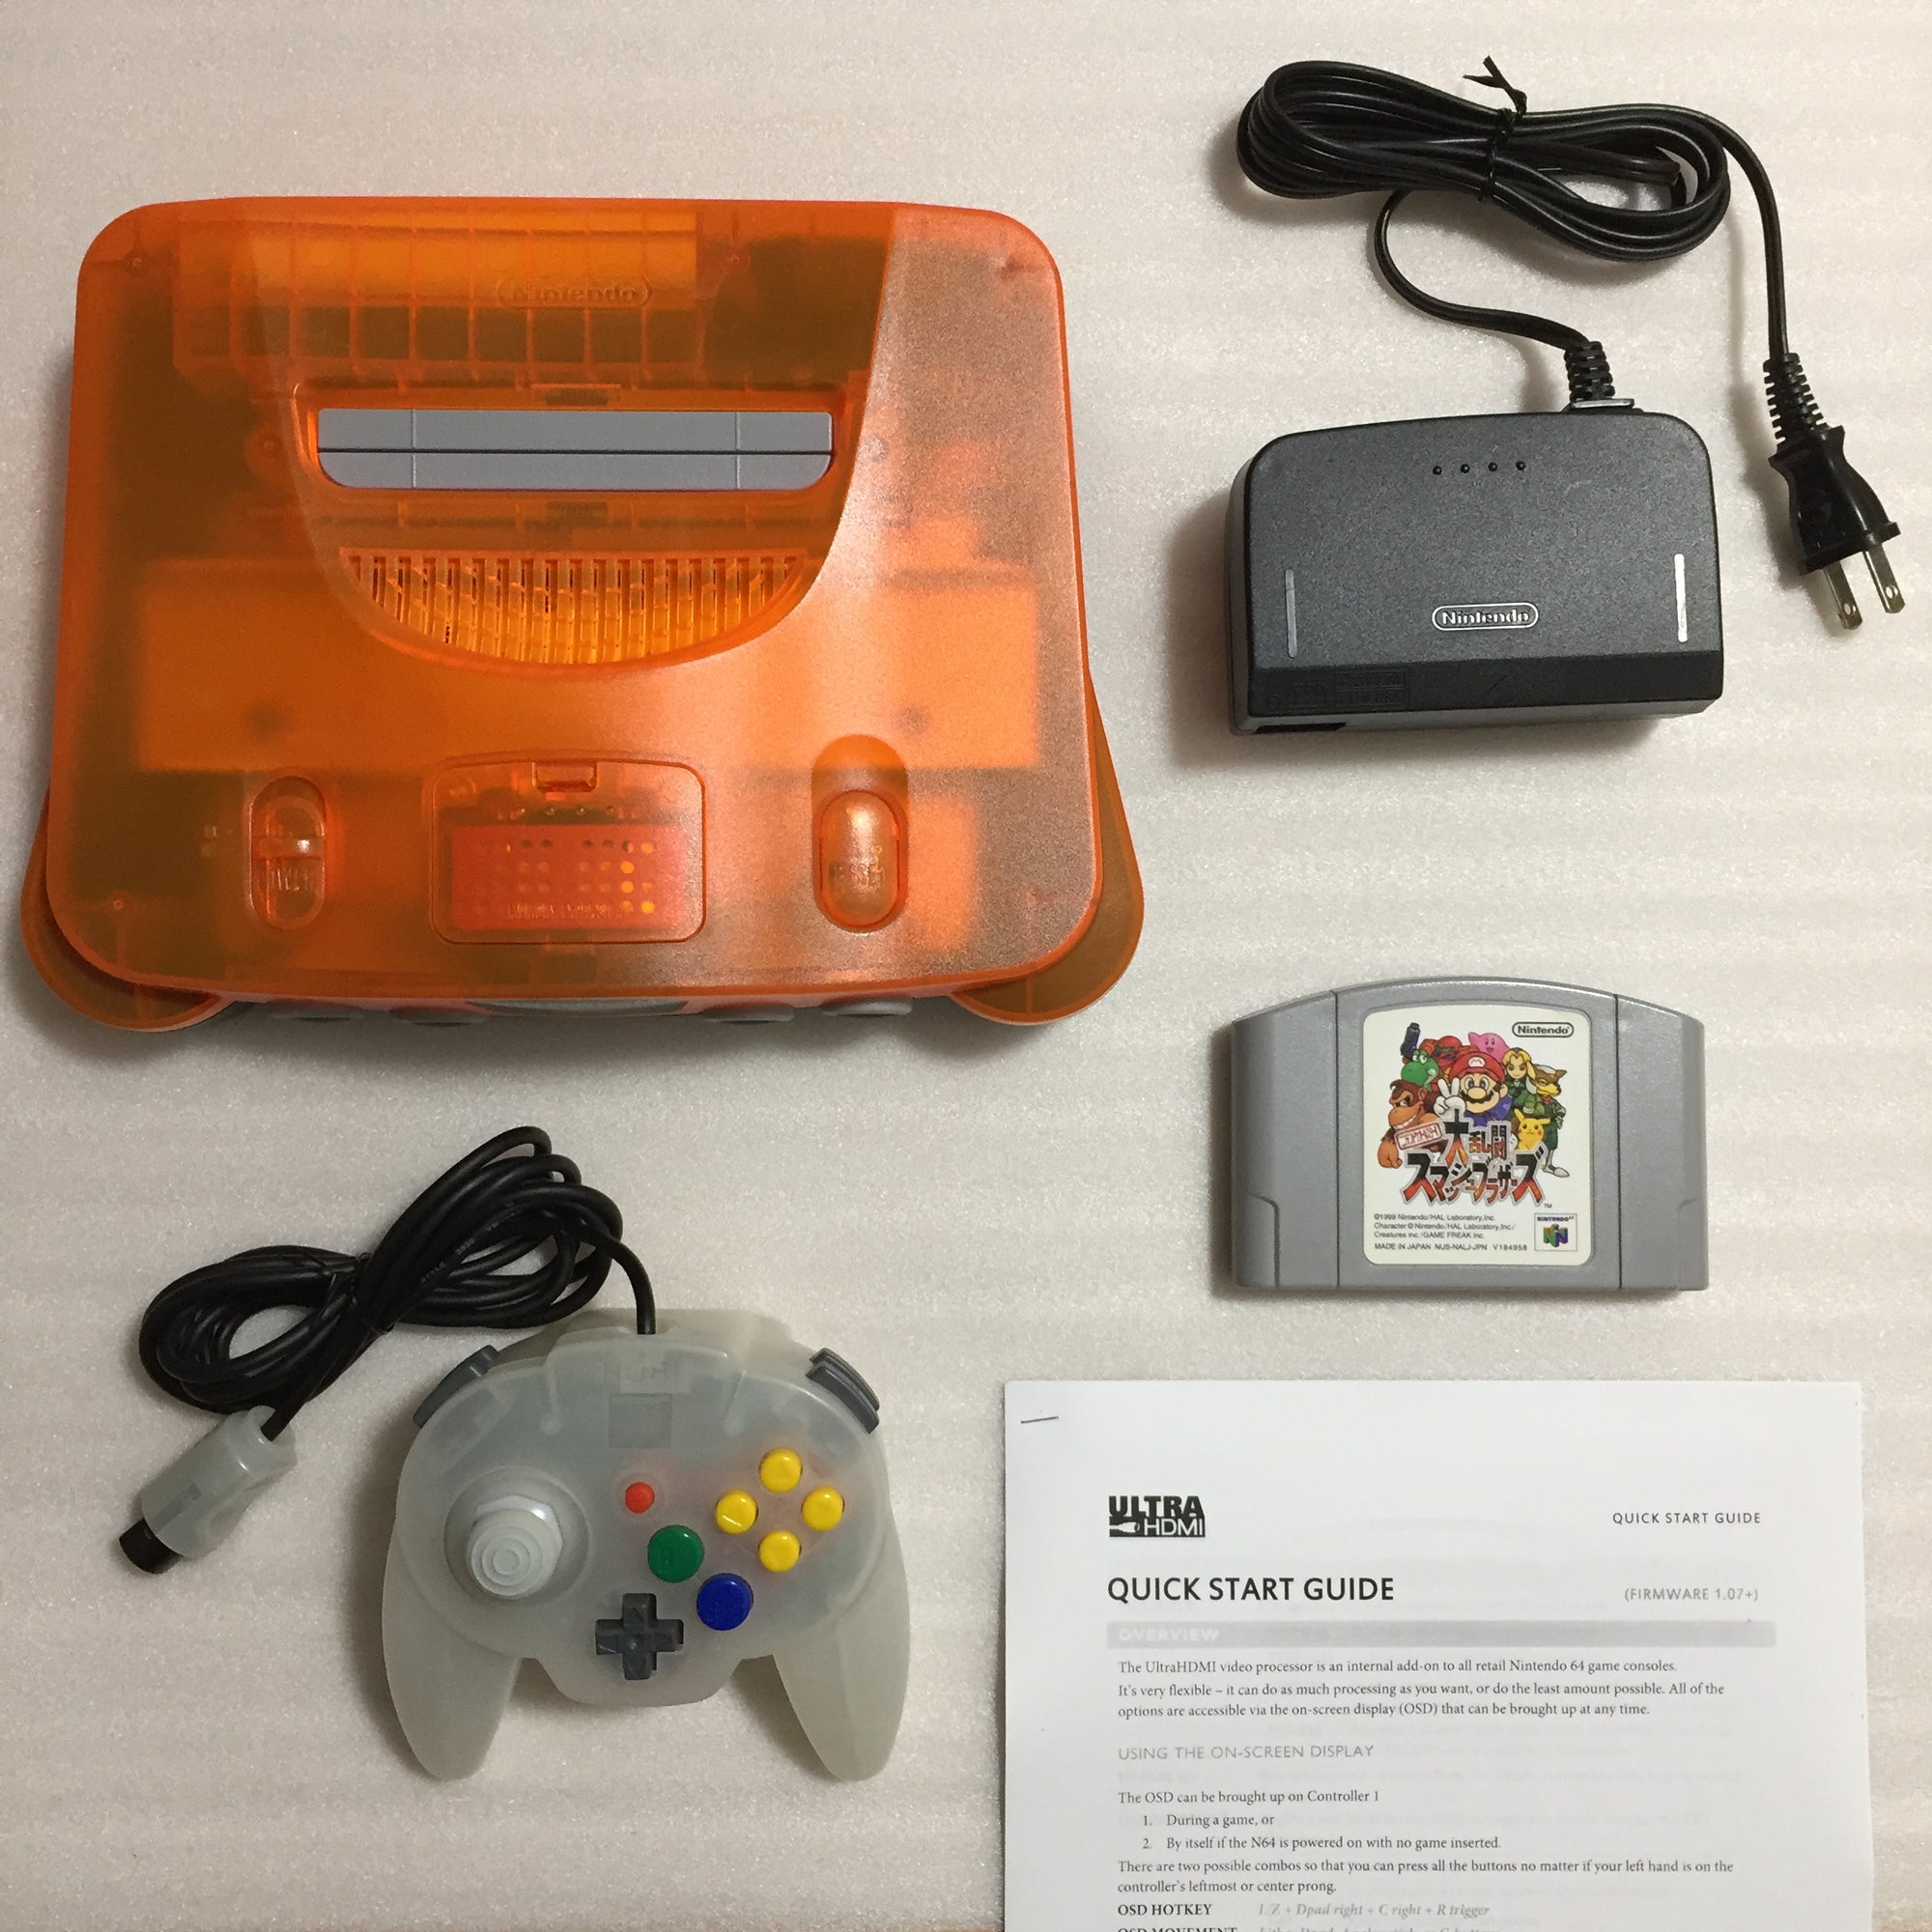 Daiei Hawks Nintendo 64 set with ULTRA HDMI kit - compatible with JP and US games